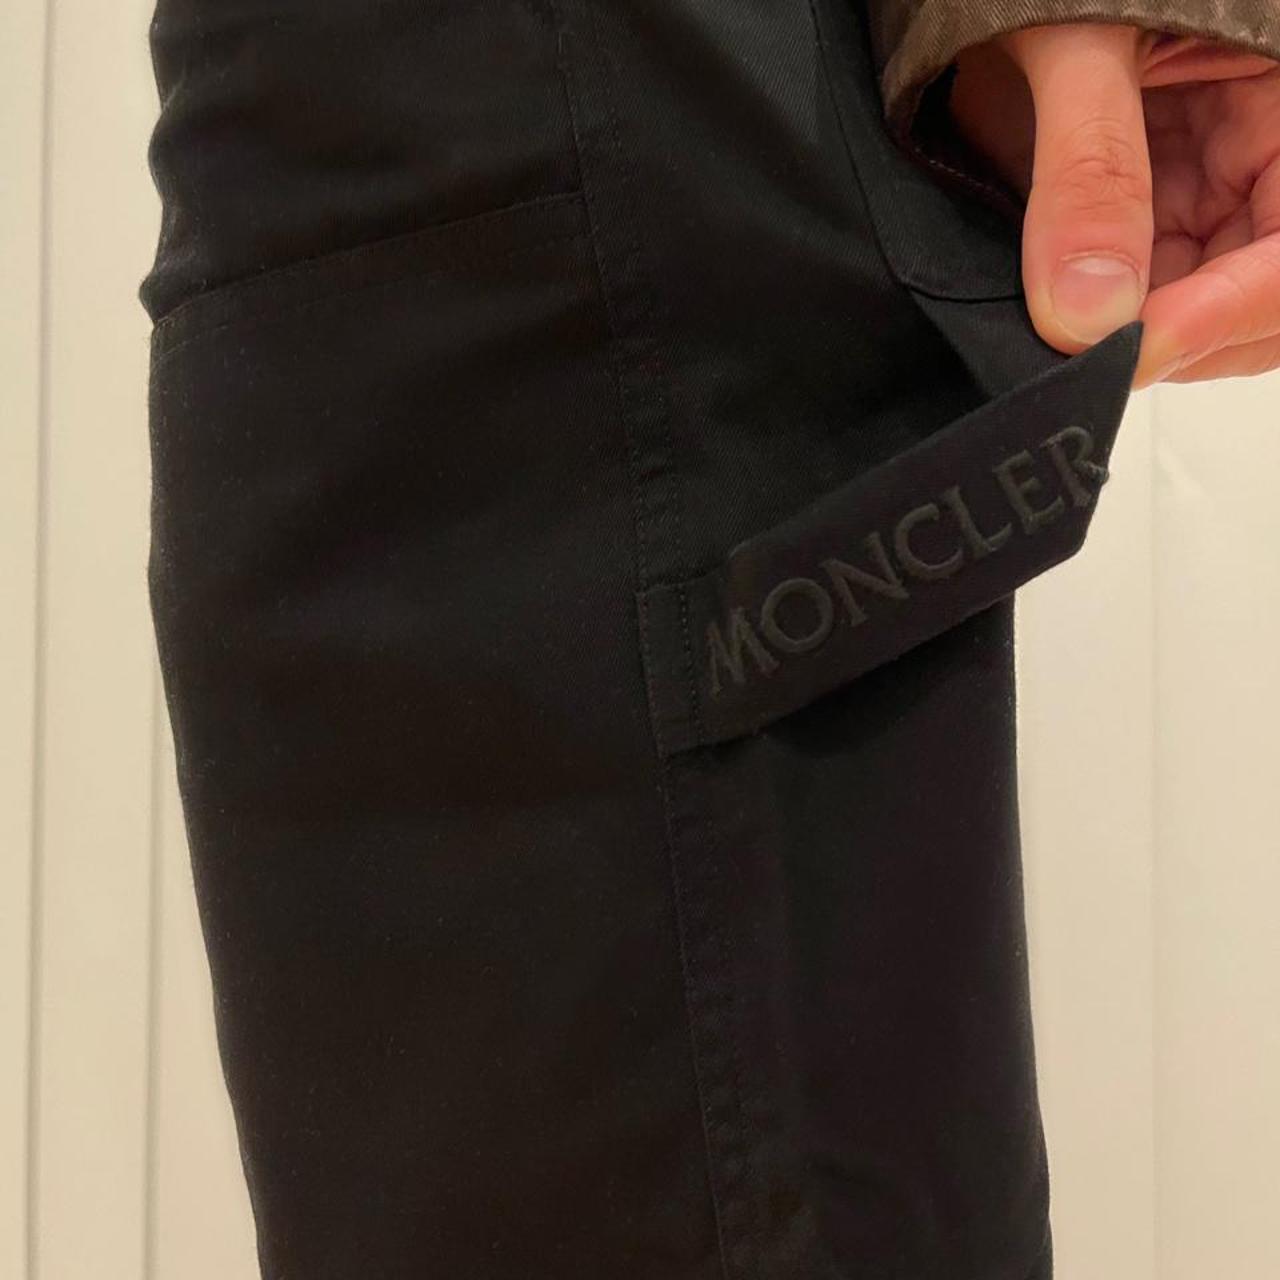 MONCLER Pantalone Sportivo Very good condition with... - Depop